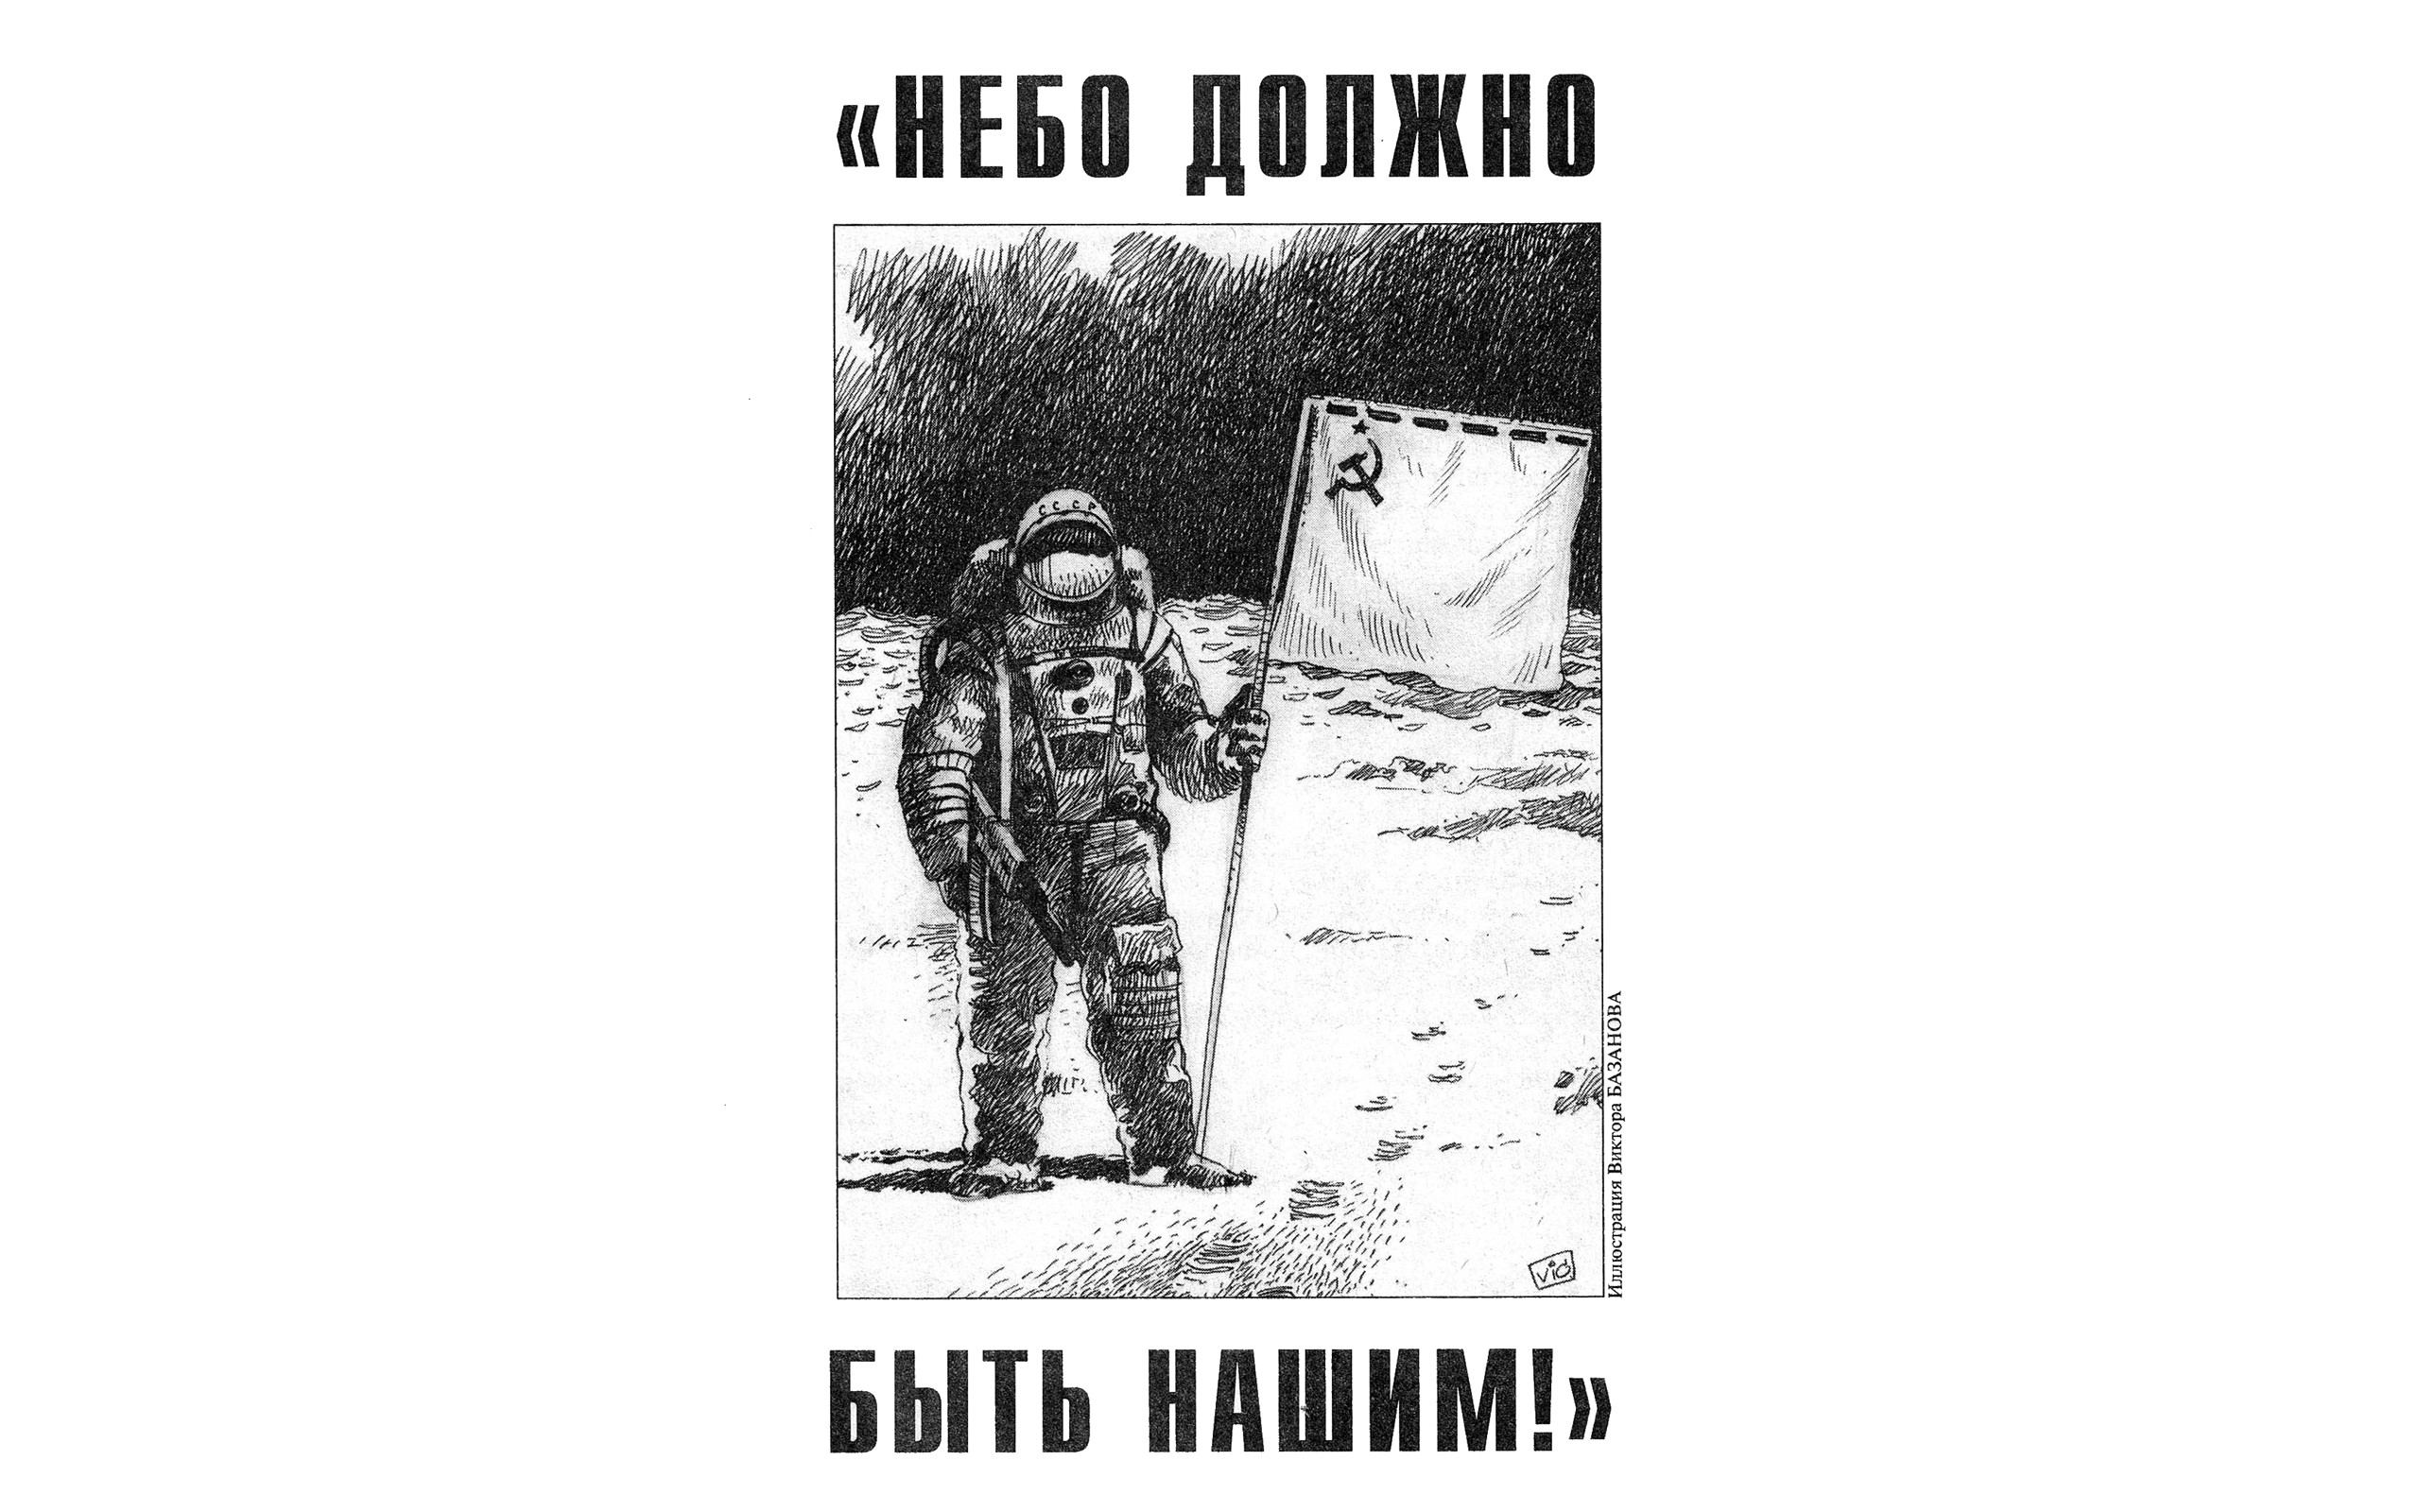 General 2560x1600 space flag drawing astronaut artwork USSR science fiction